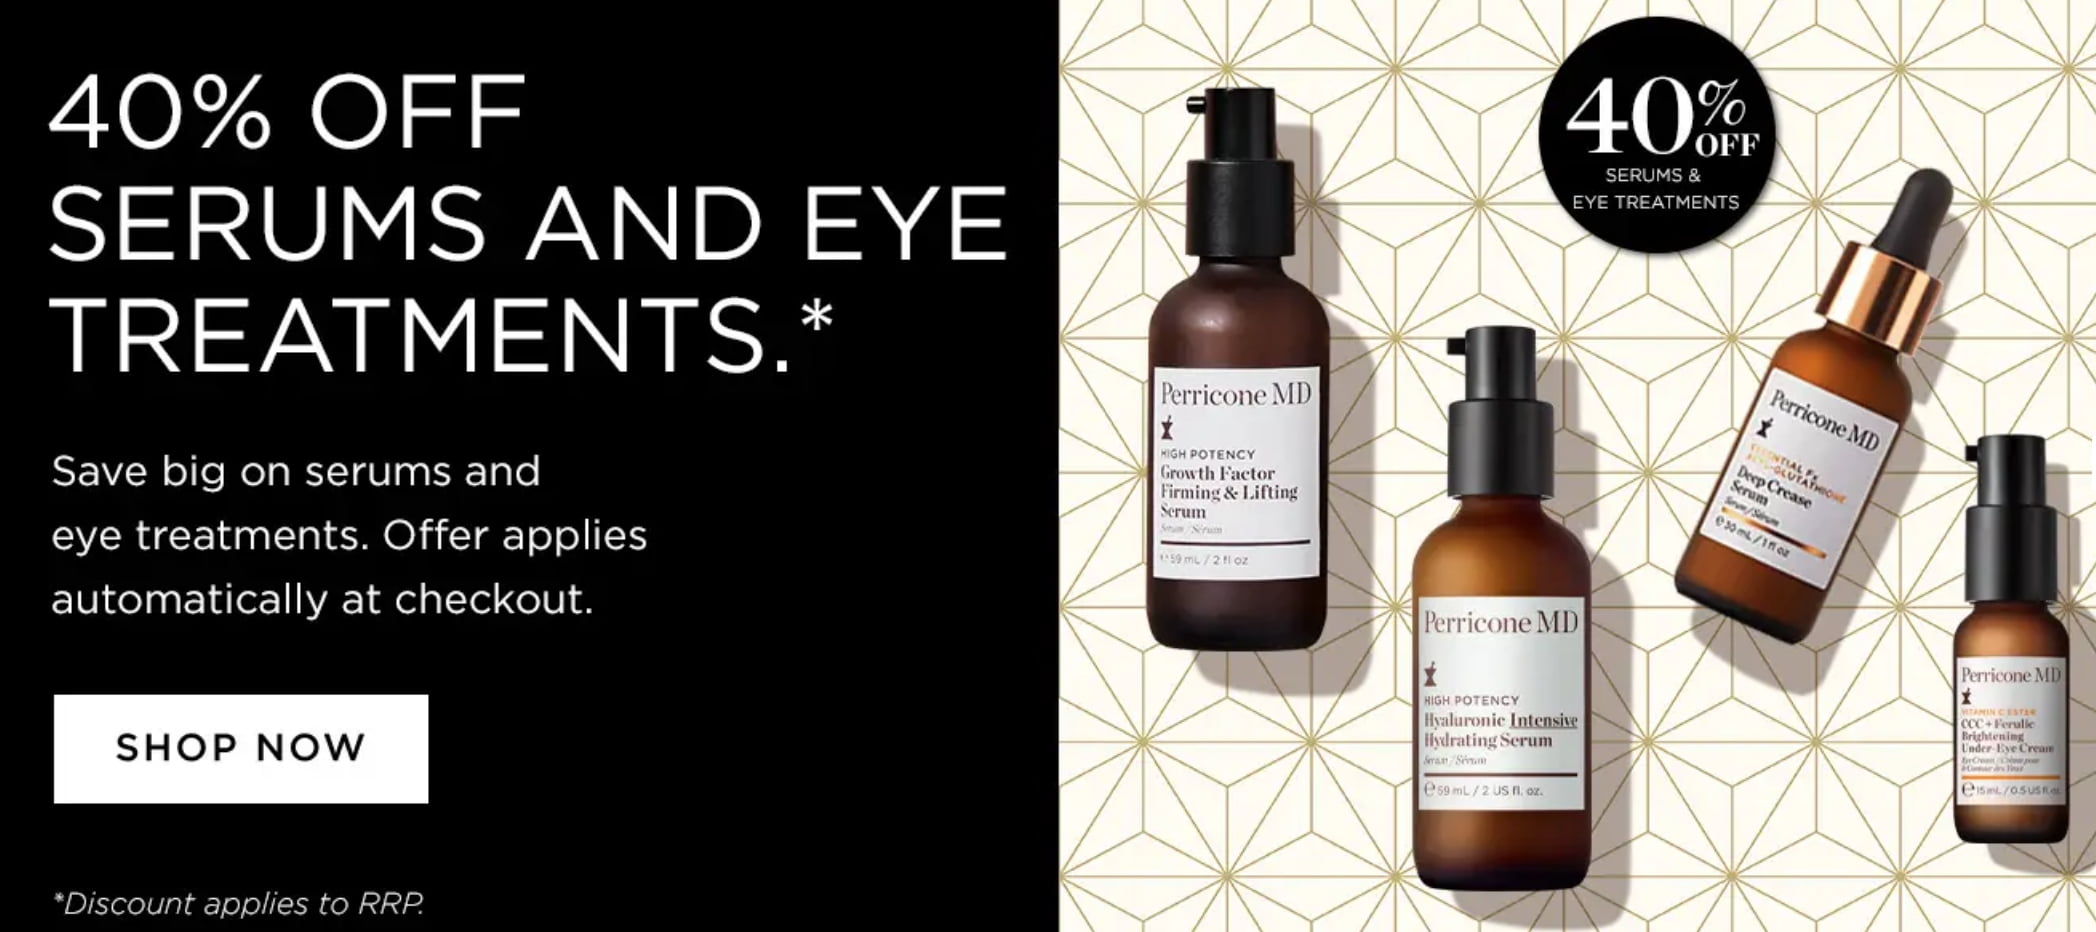 40% Off Serums and Eye Treatments at Perricone MD